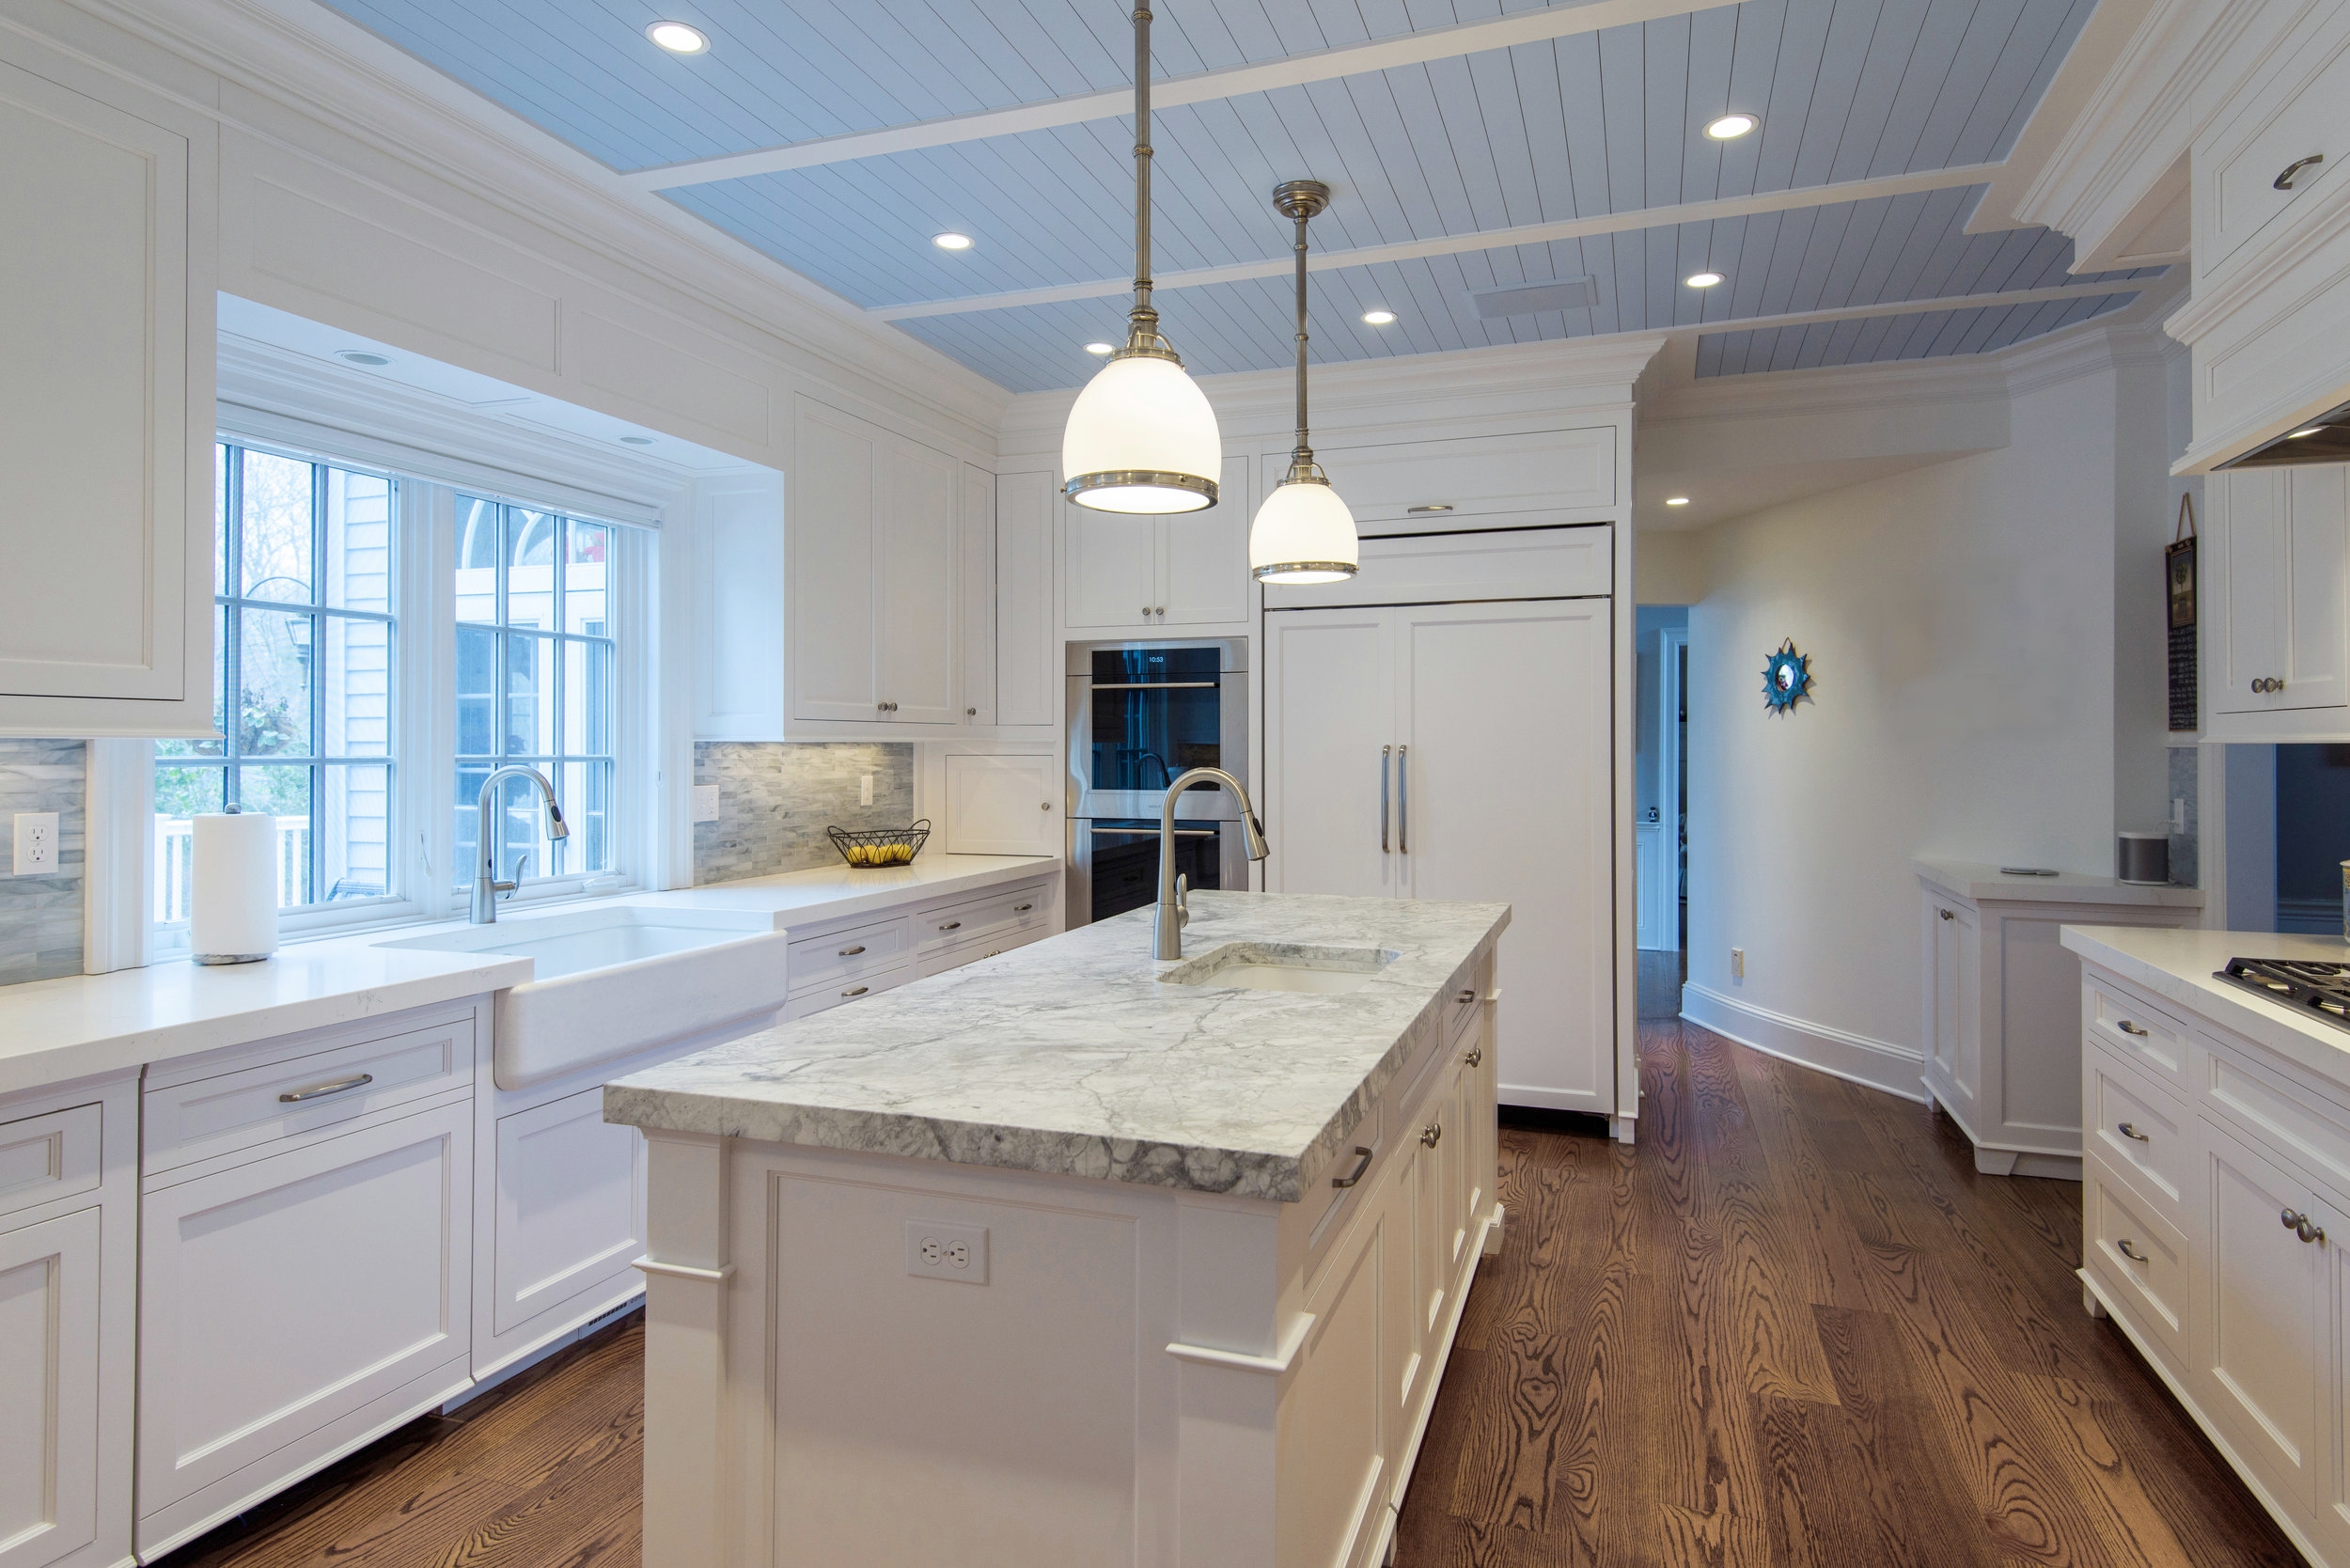 Titus Built - Center Island with Marble Kitchen Countertop